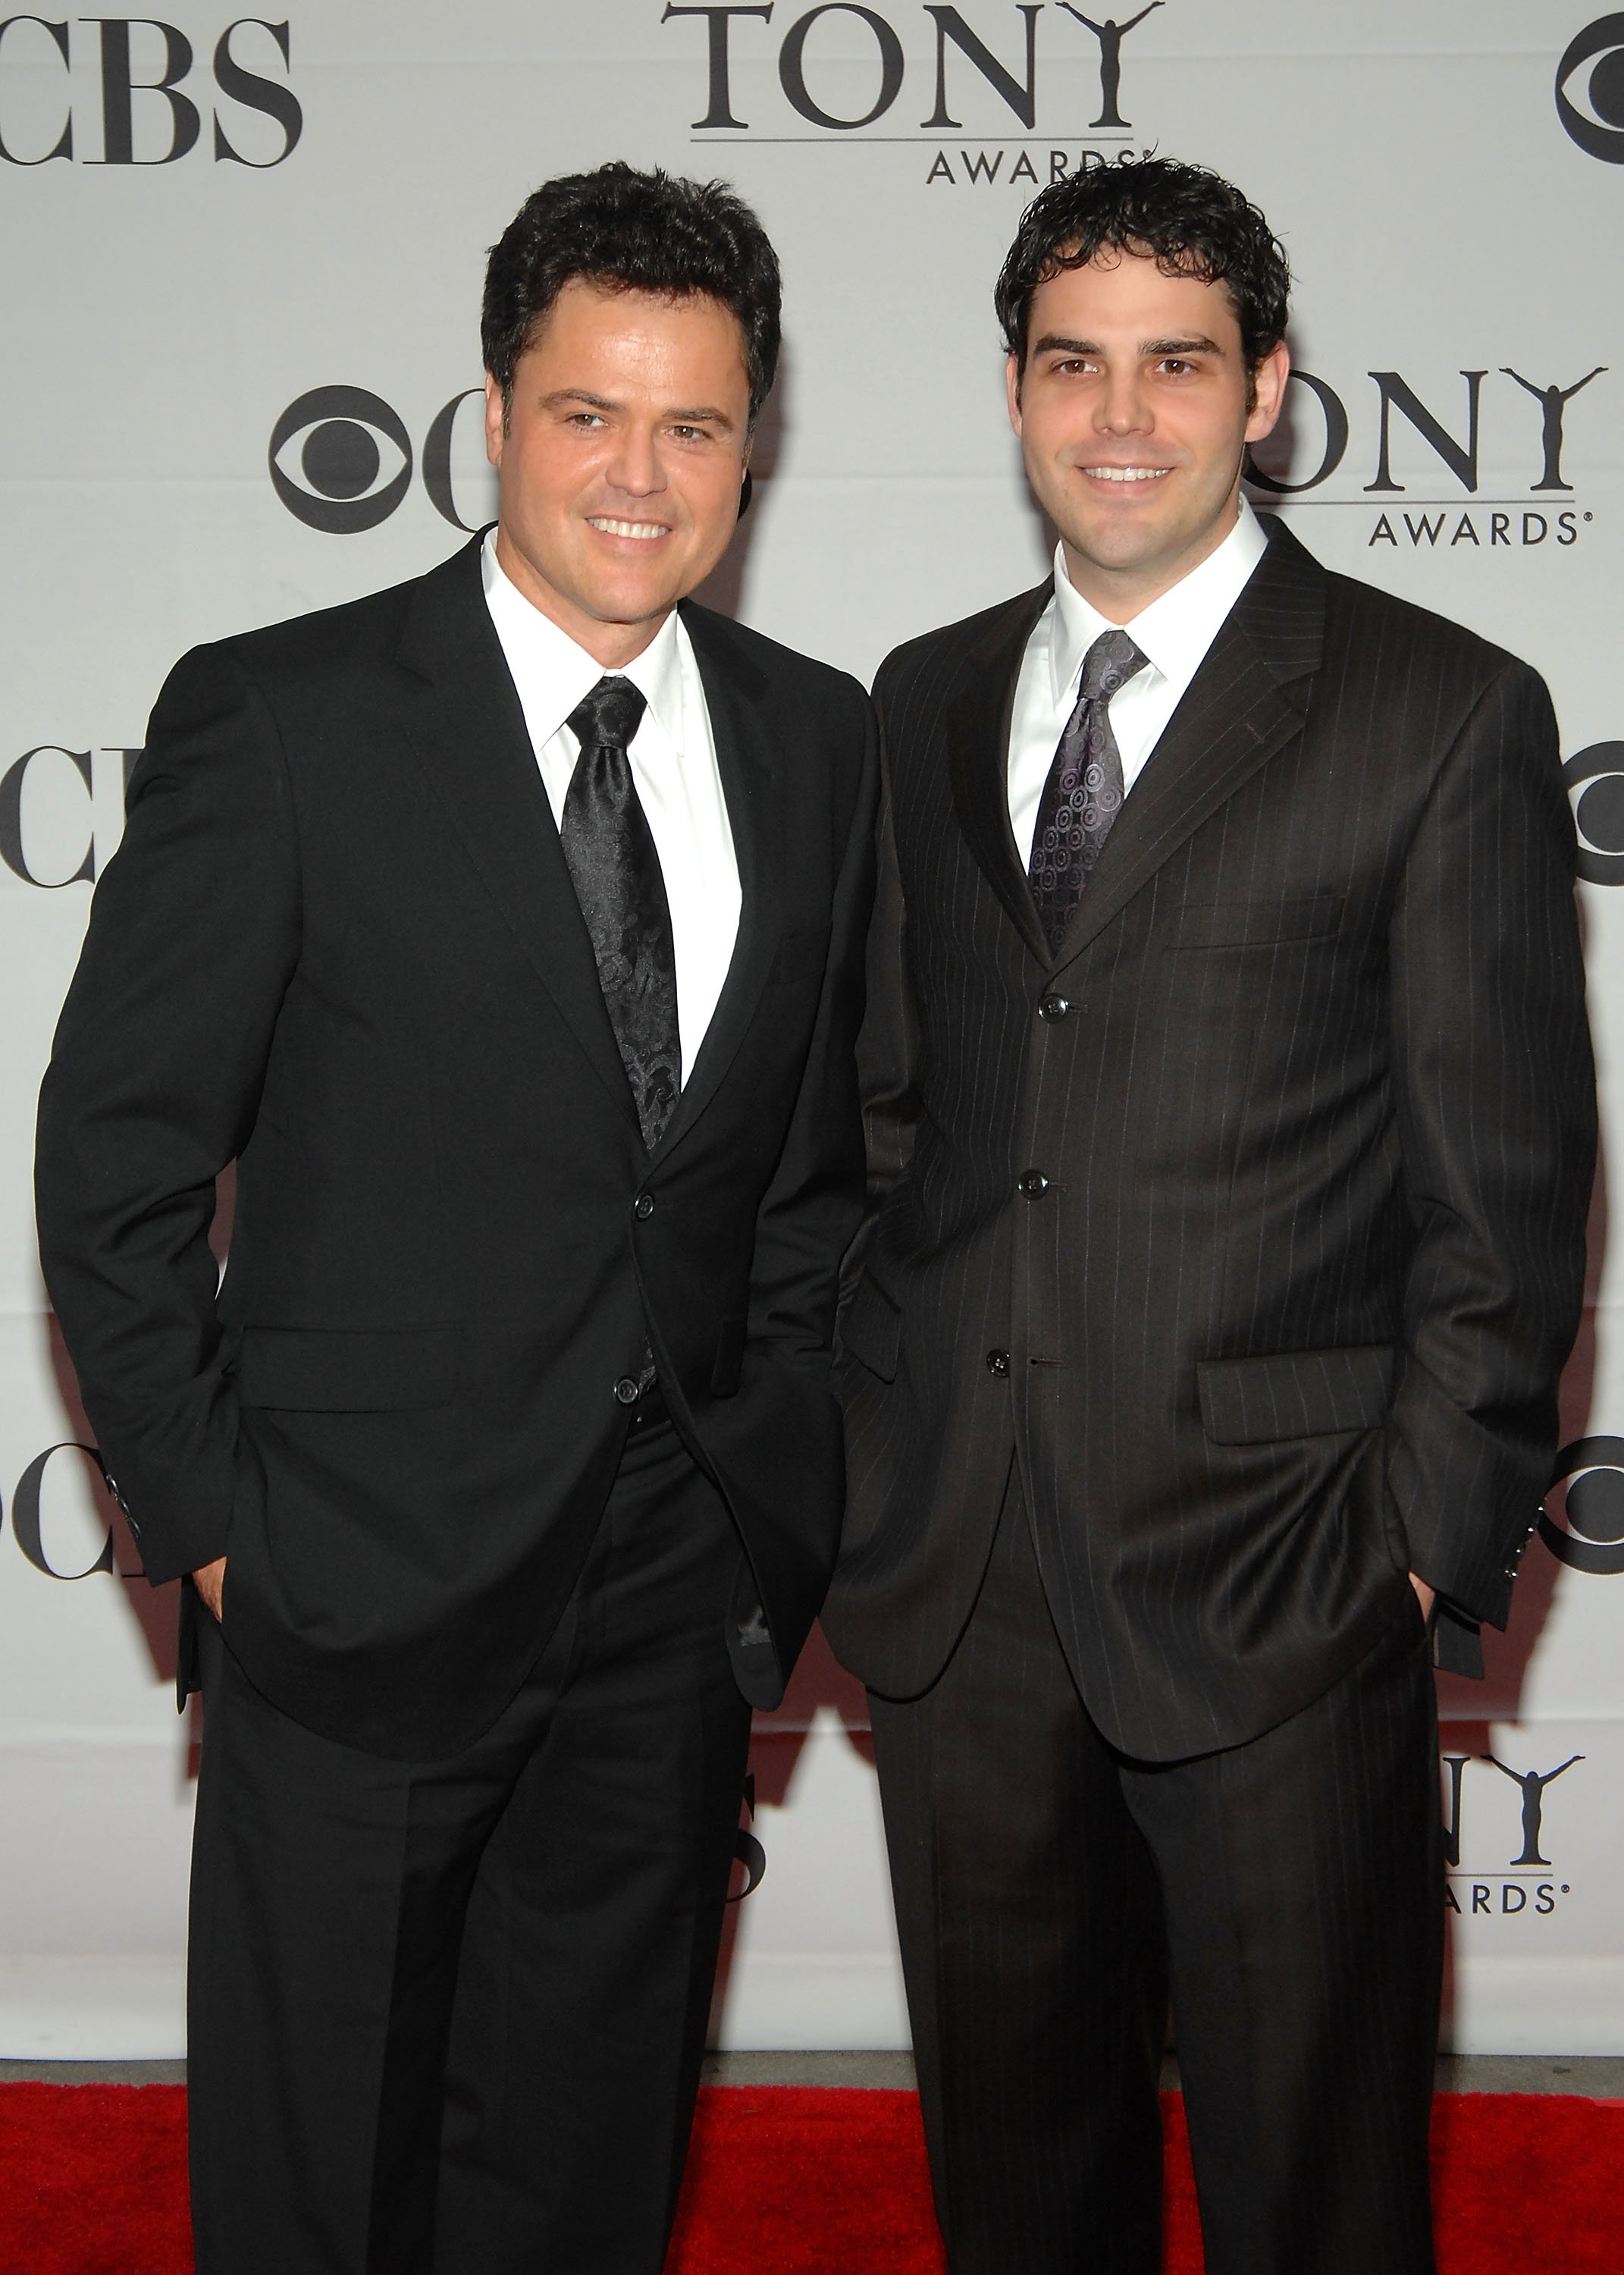 Donny Osmond and his son Donny Osmond Jr. arriving at the 61st Annual Tony Awards at Radio City Music Hall June 10, 2007 in New York City. | Source: Getty Images